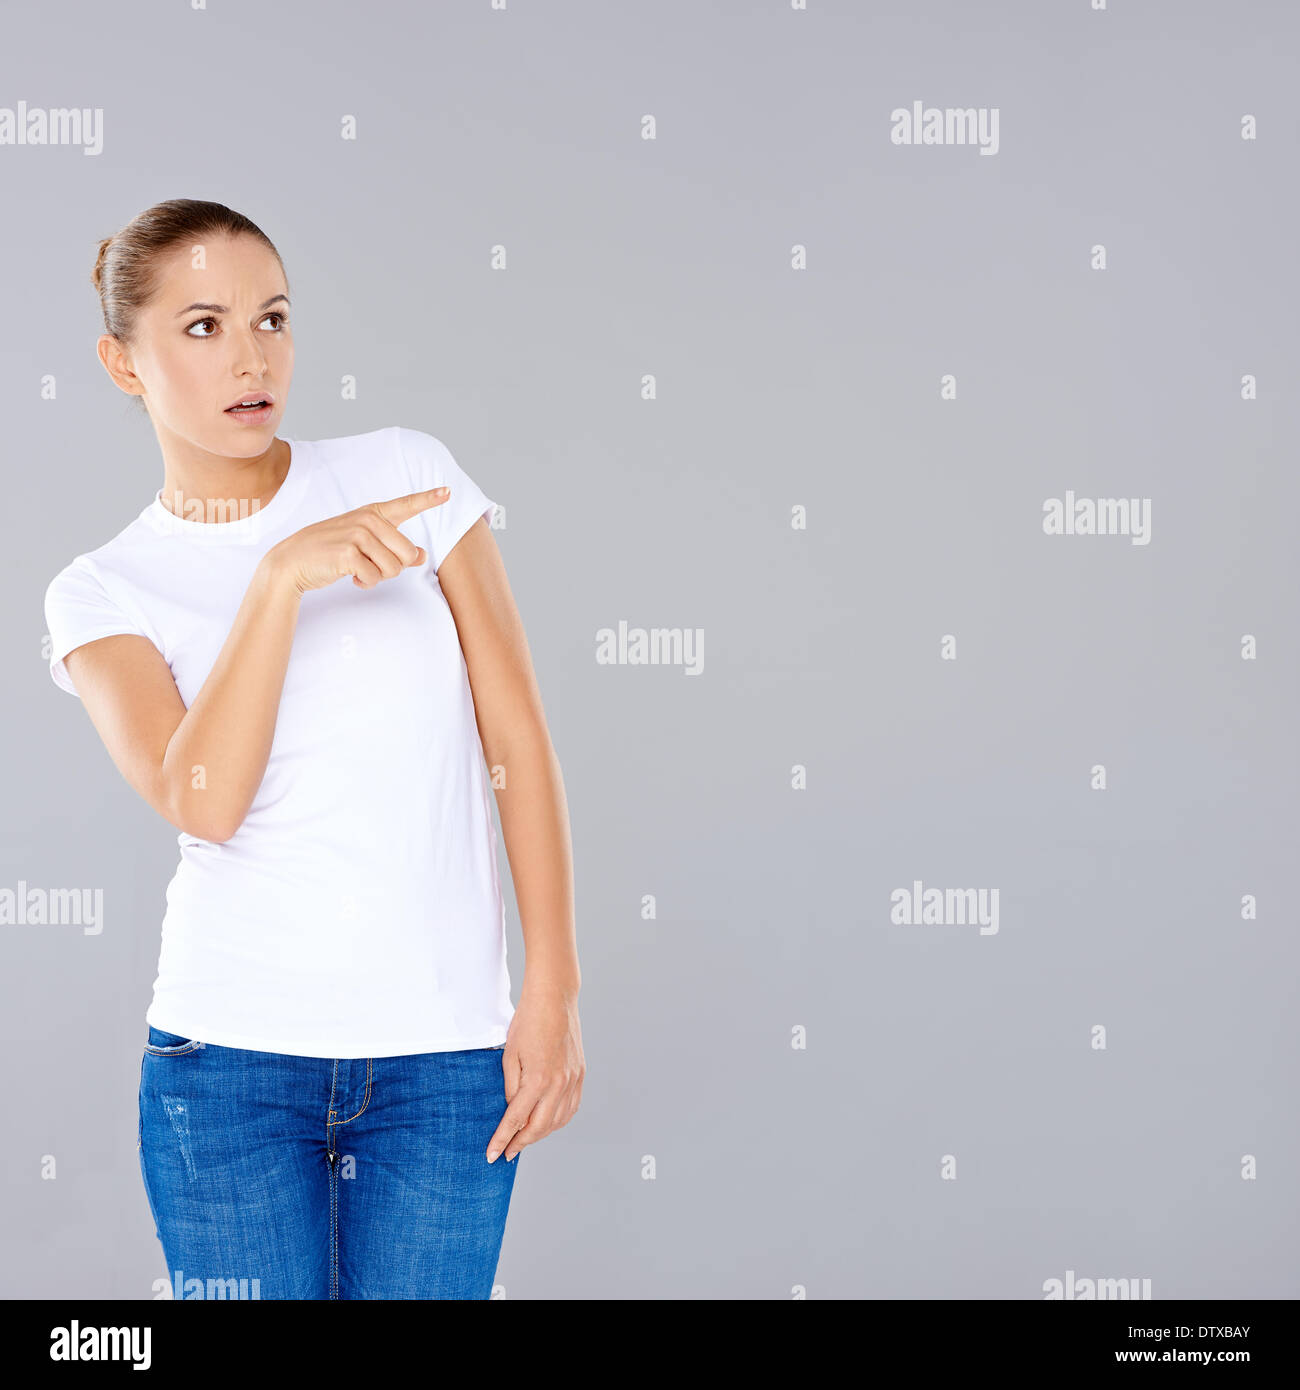 Woman pointing in disbelief Stock Photo